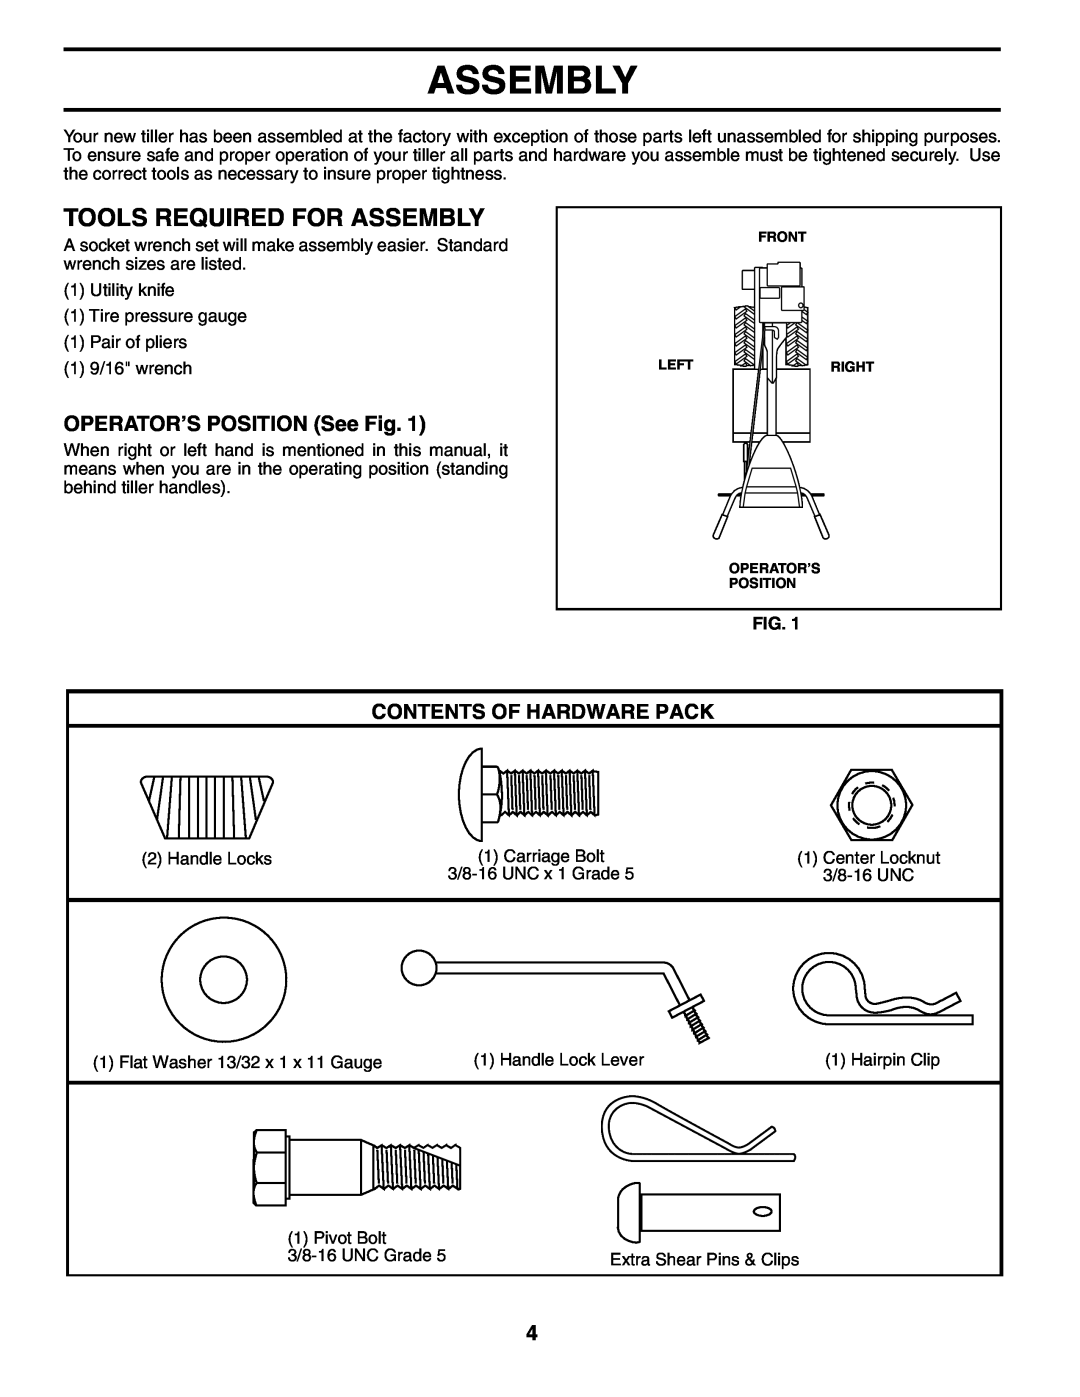 Poulan PRRT65B owner manual Tools Required For Assembly, OPERATOR’S POSITION See Fig, Contents Of Hardware Pack 